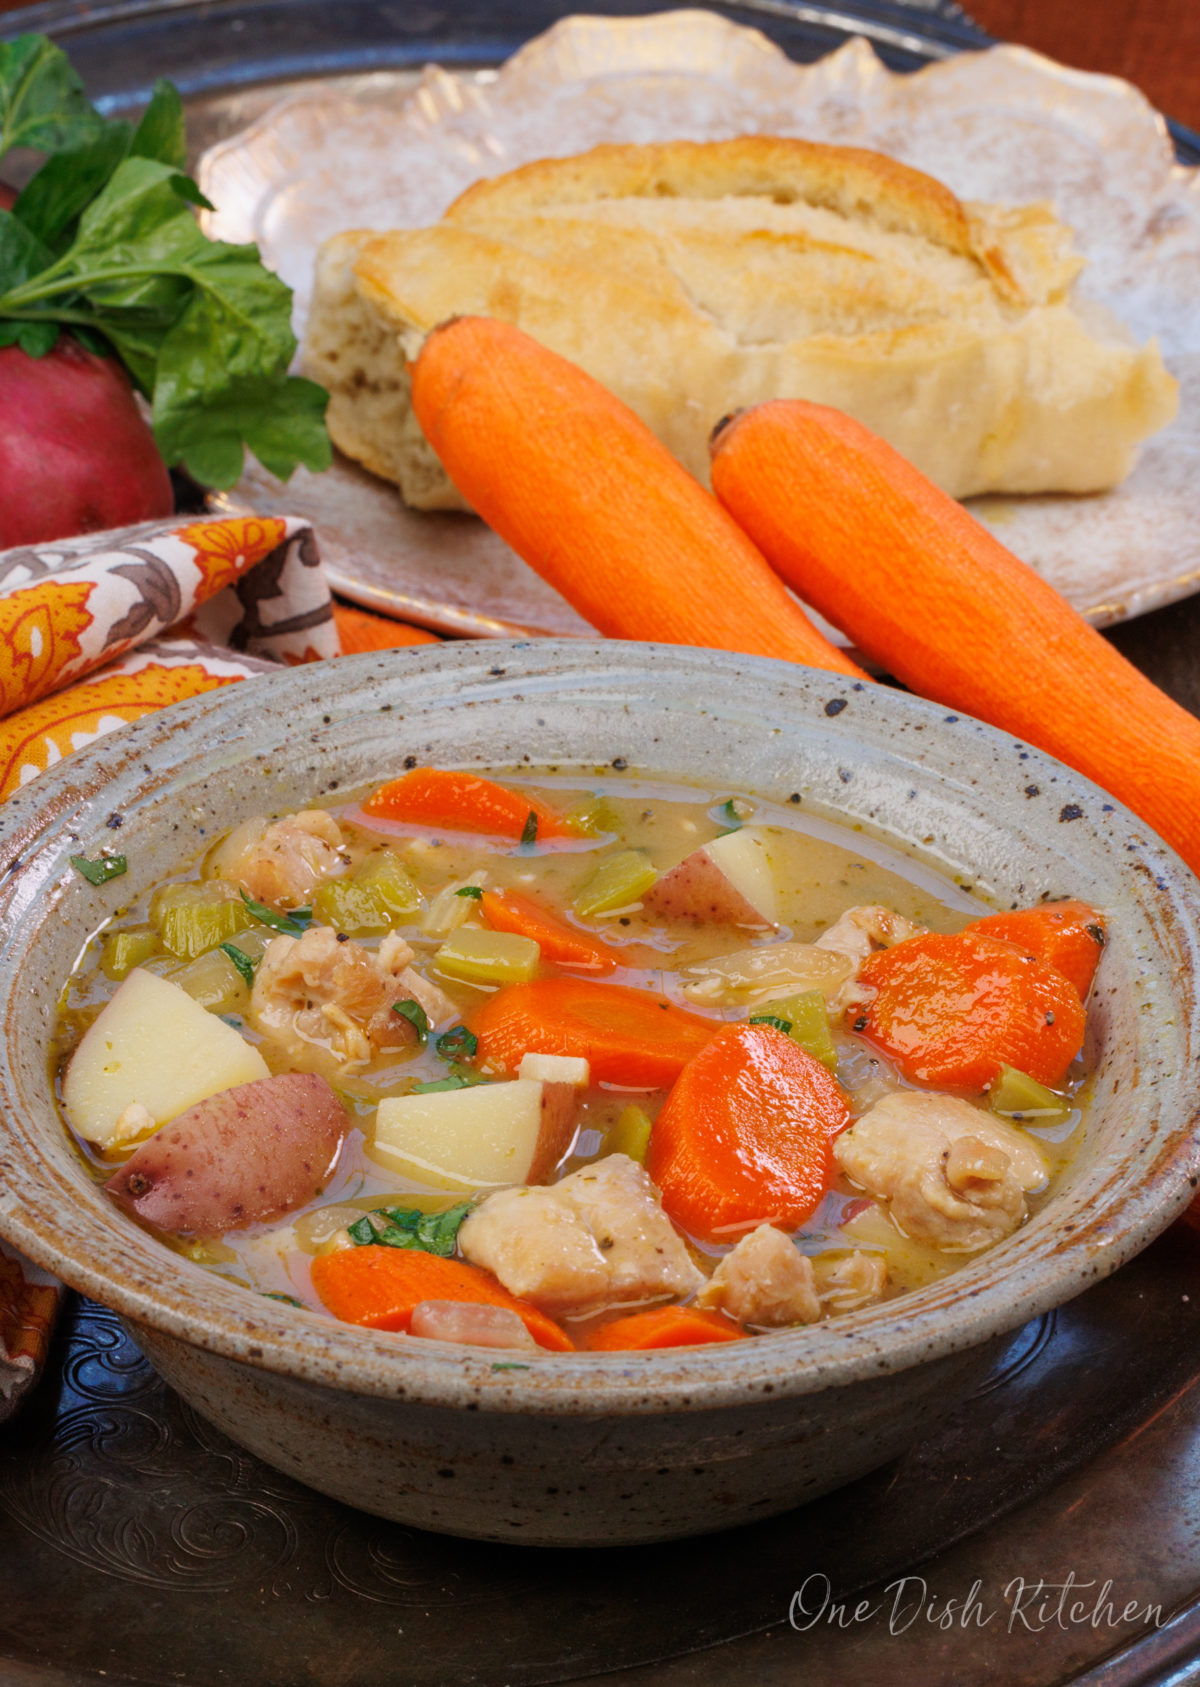 a blue bowl filled with chicken stew next to a plate with a loaf of french bread.